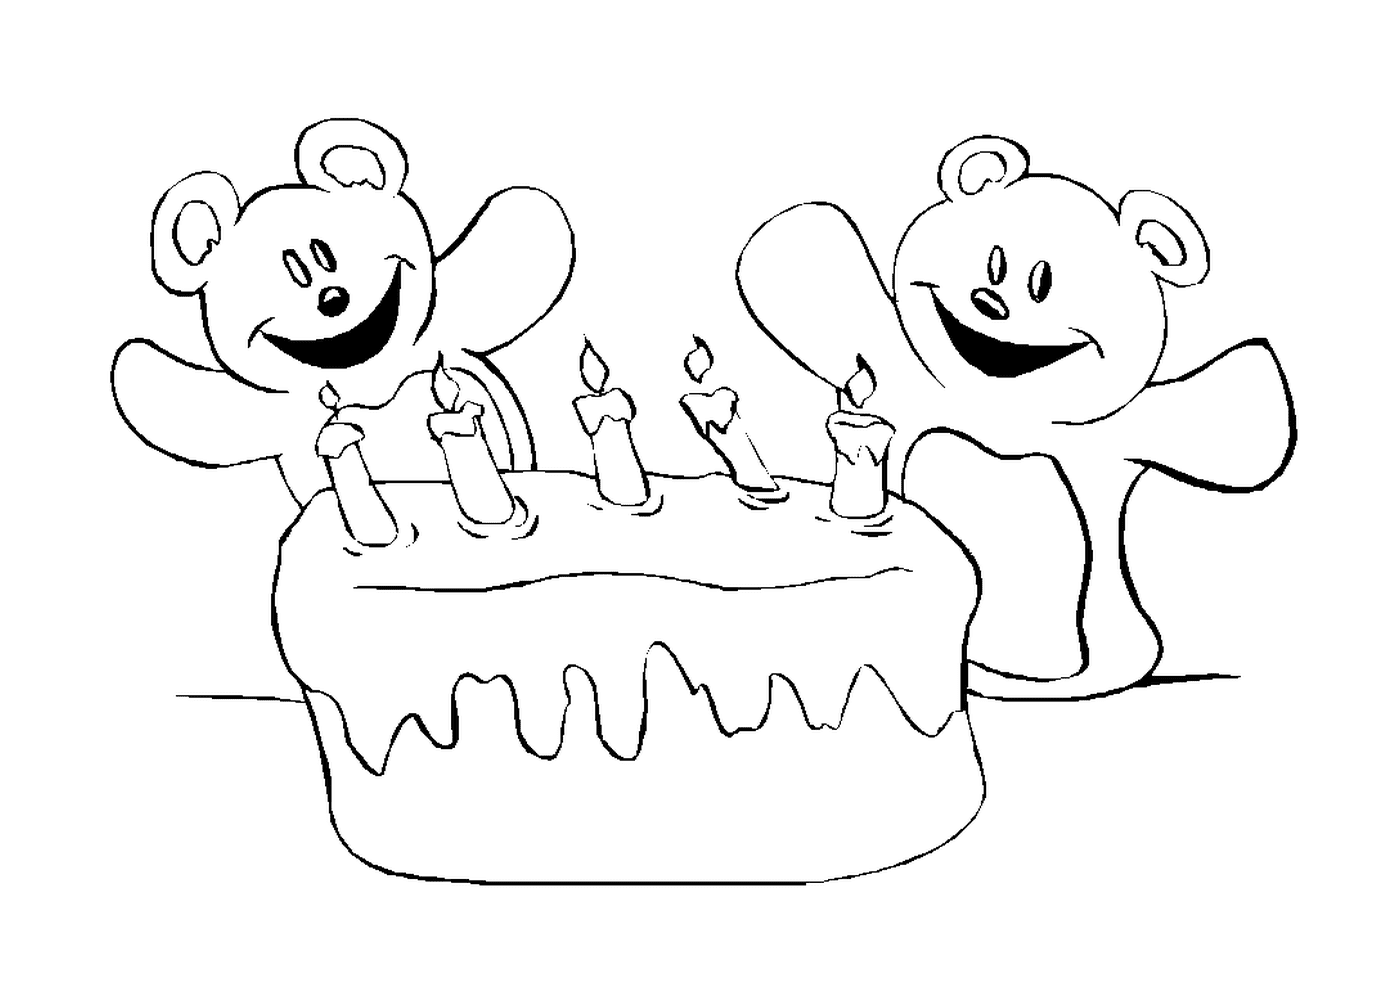  Birthday cake with 5 candles 